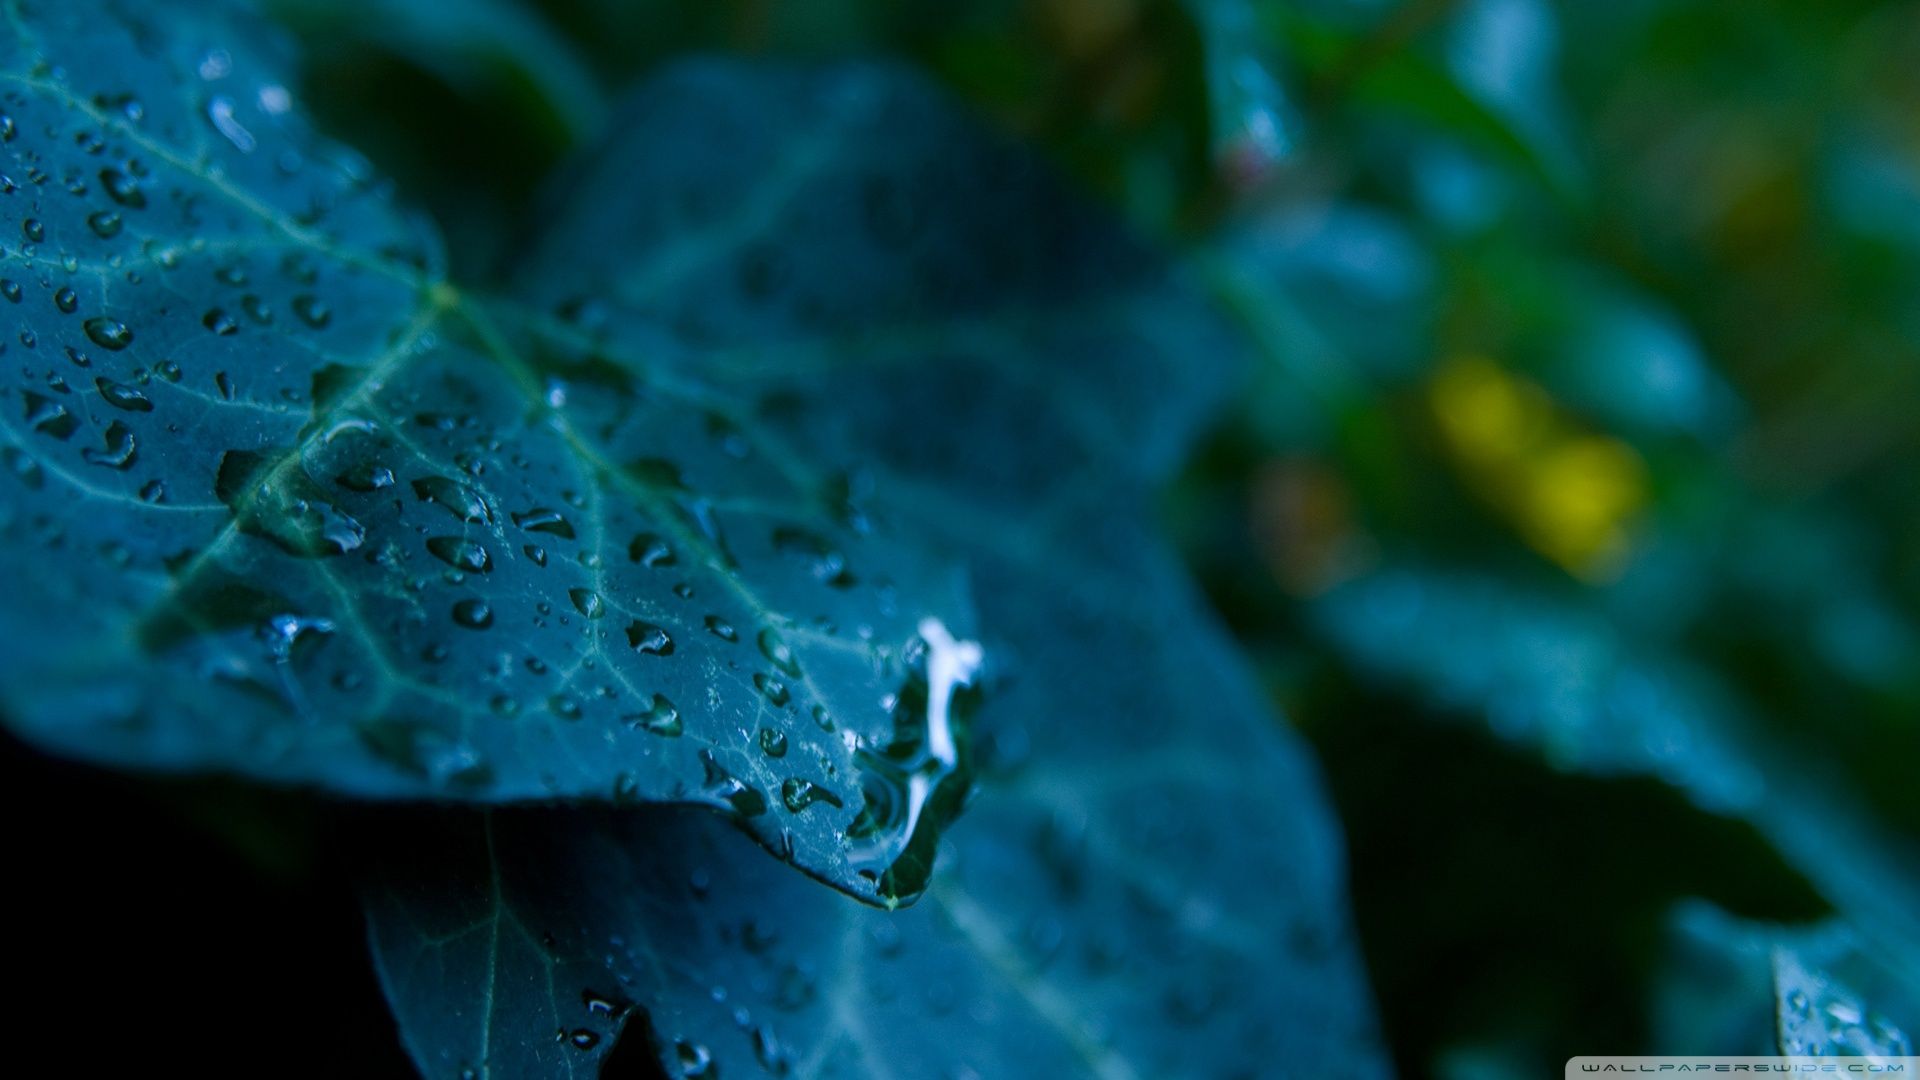 Download Leaves And Water Drops Wallpaper 1920x1080